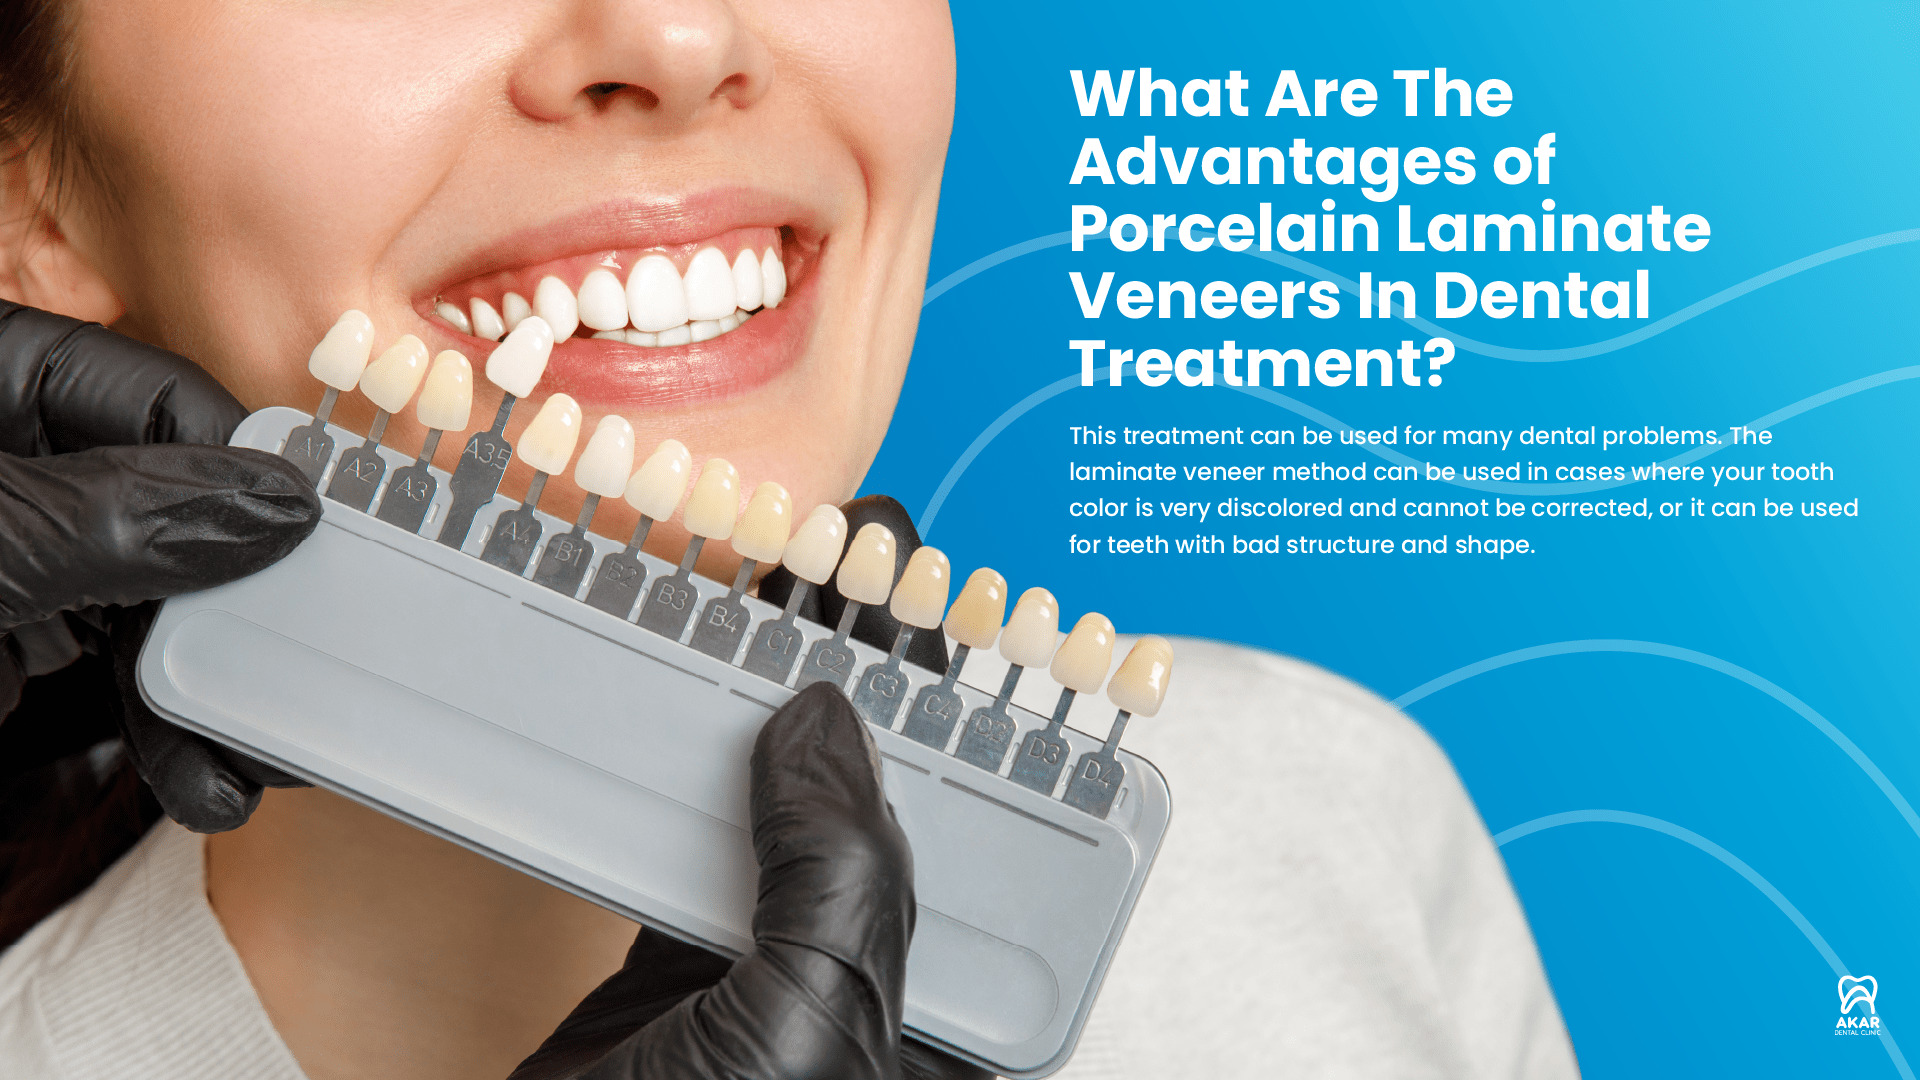 What Are The Disadvantages of Porcelain Laminate Veneers In Dental Treatment? - Turkey - Antalya